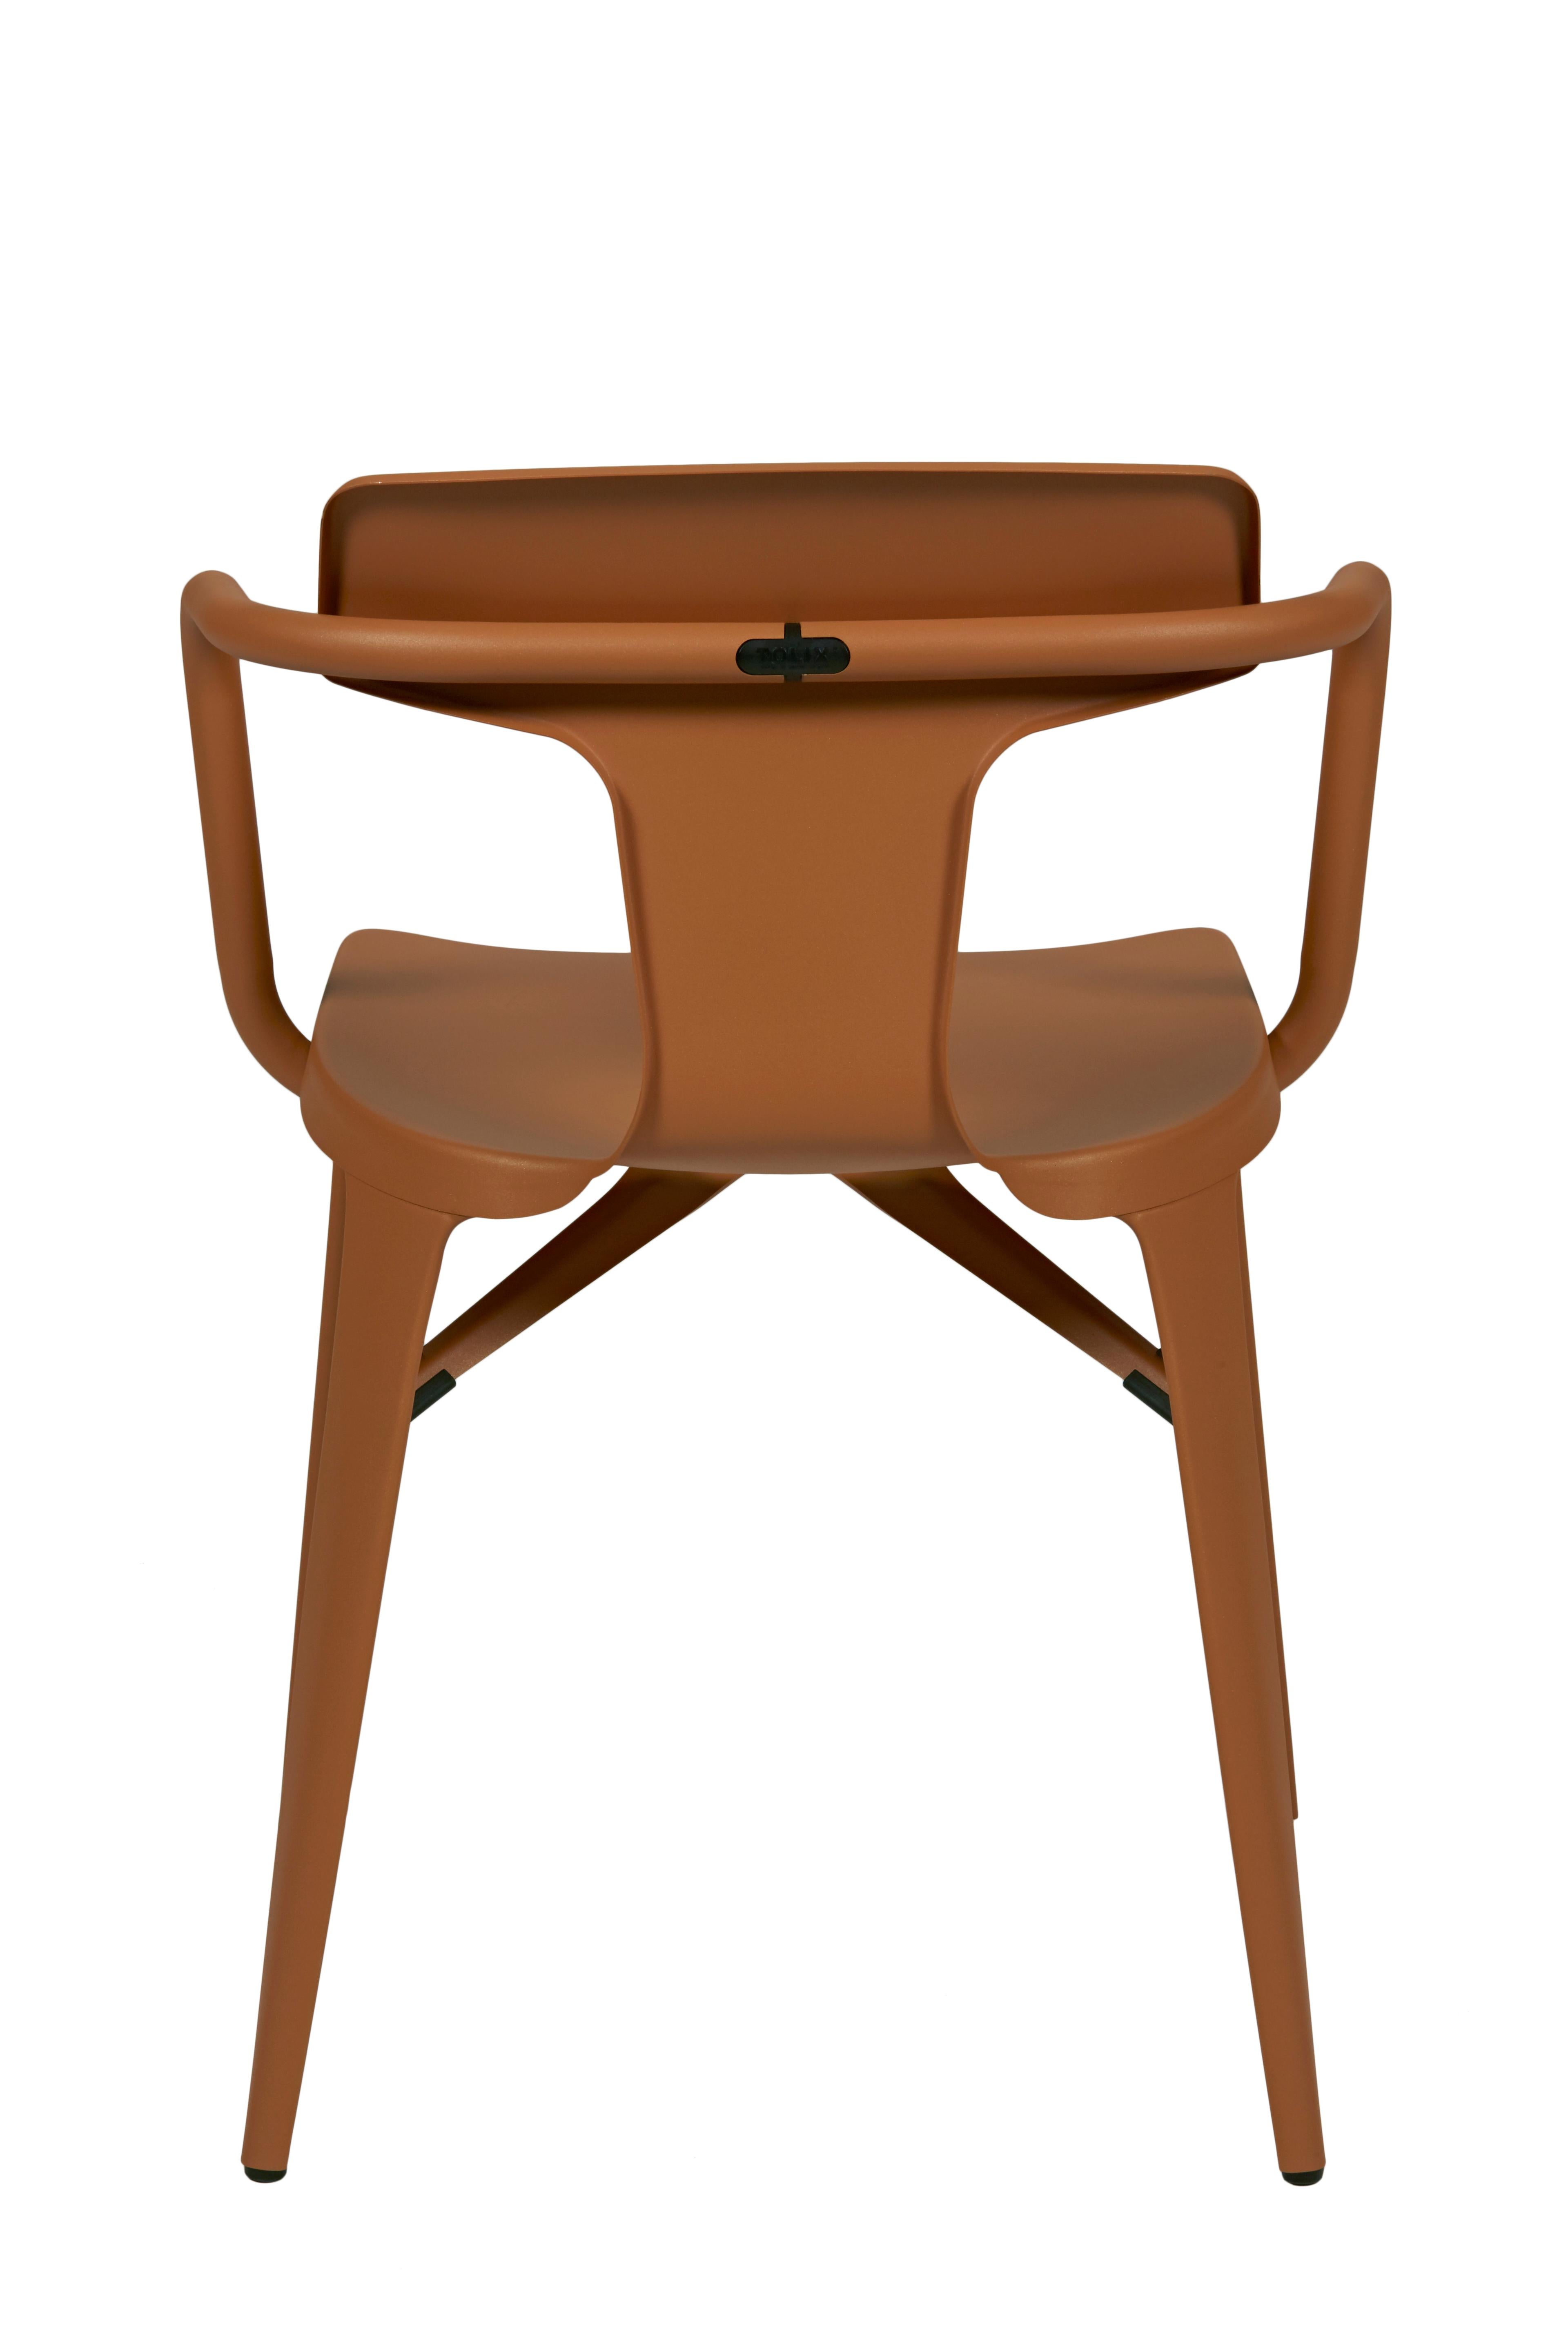 Im Angebot: T14 Chair in Pop Colors by Patrick Norguet and Tolix, Orange (Terracotta) 2